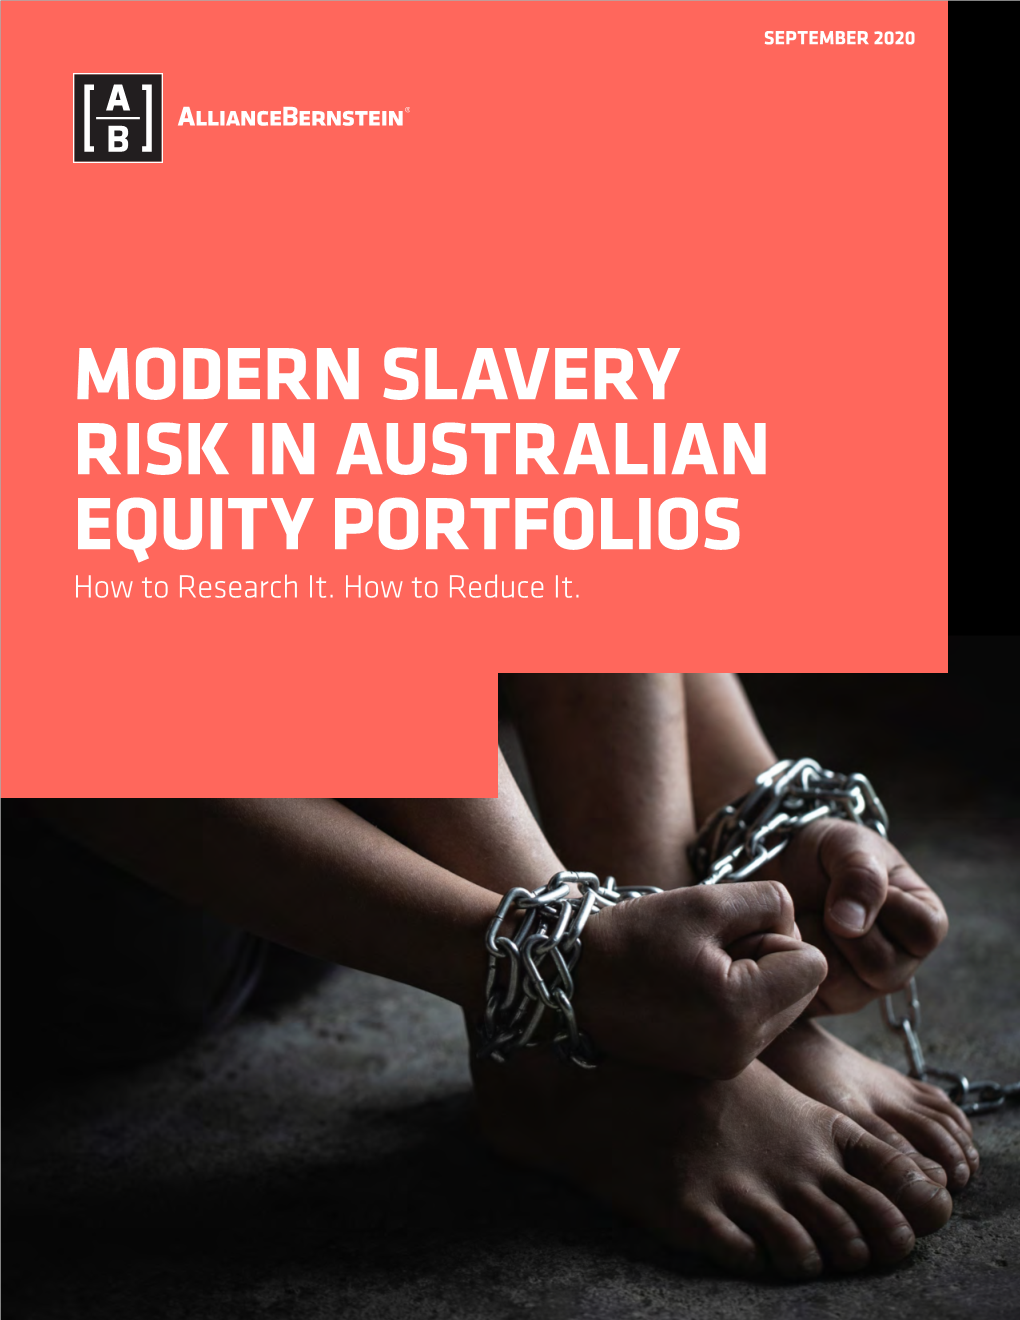 MODERN SLAVERY RISK in AUSTRALIAN EQUITY PORTFOLIOS How to Research It